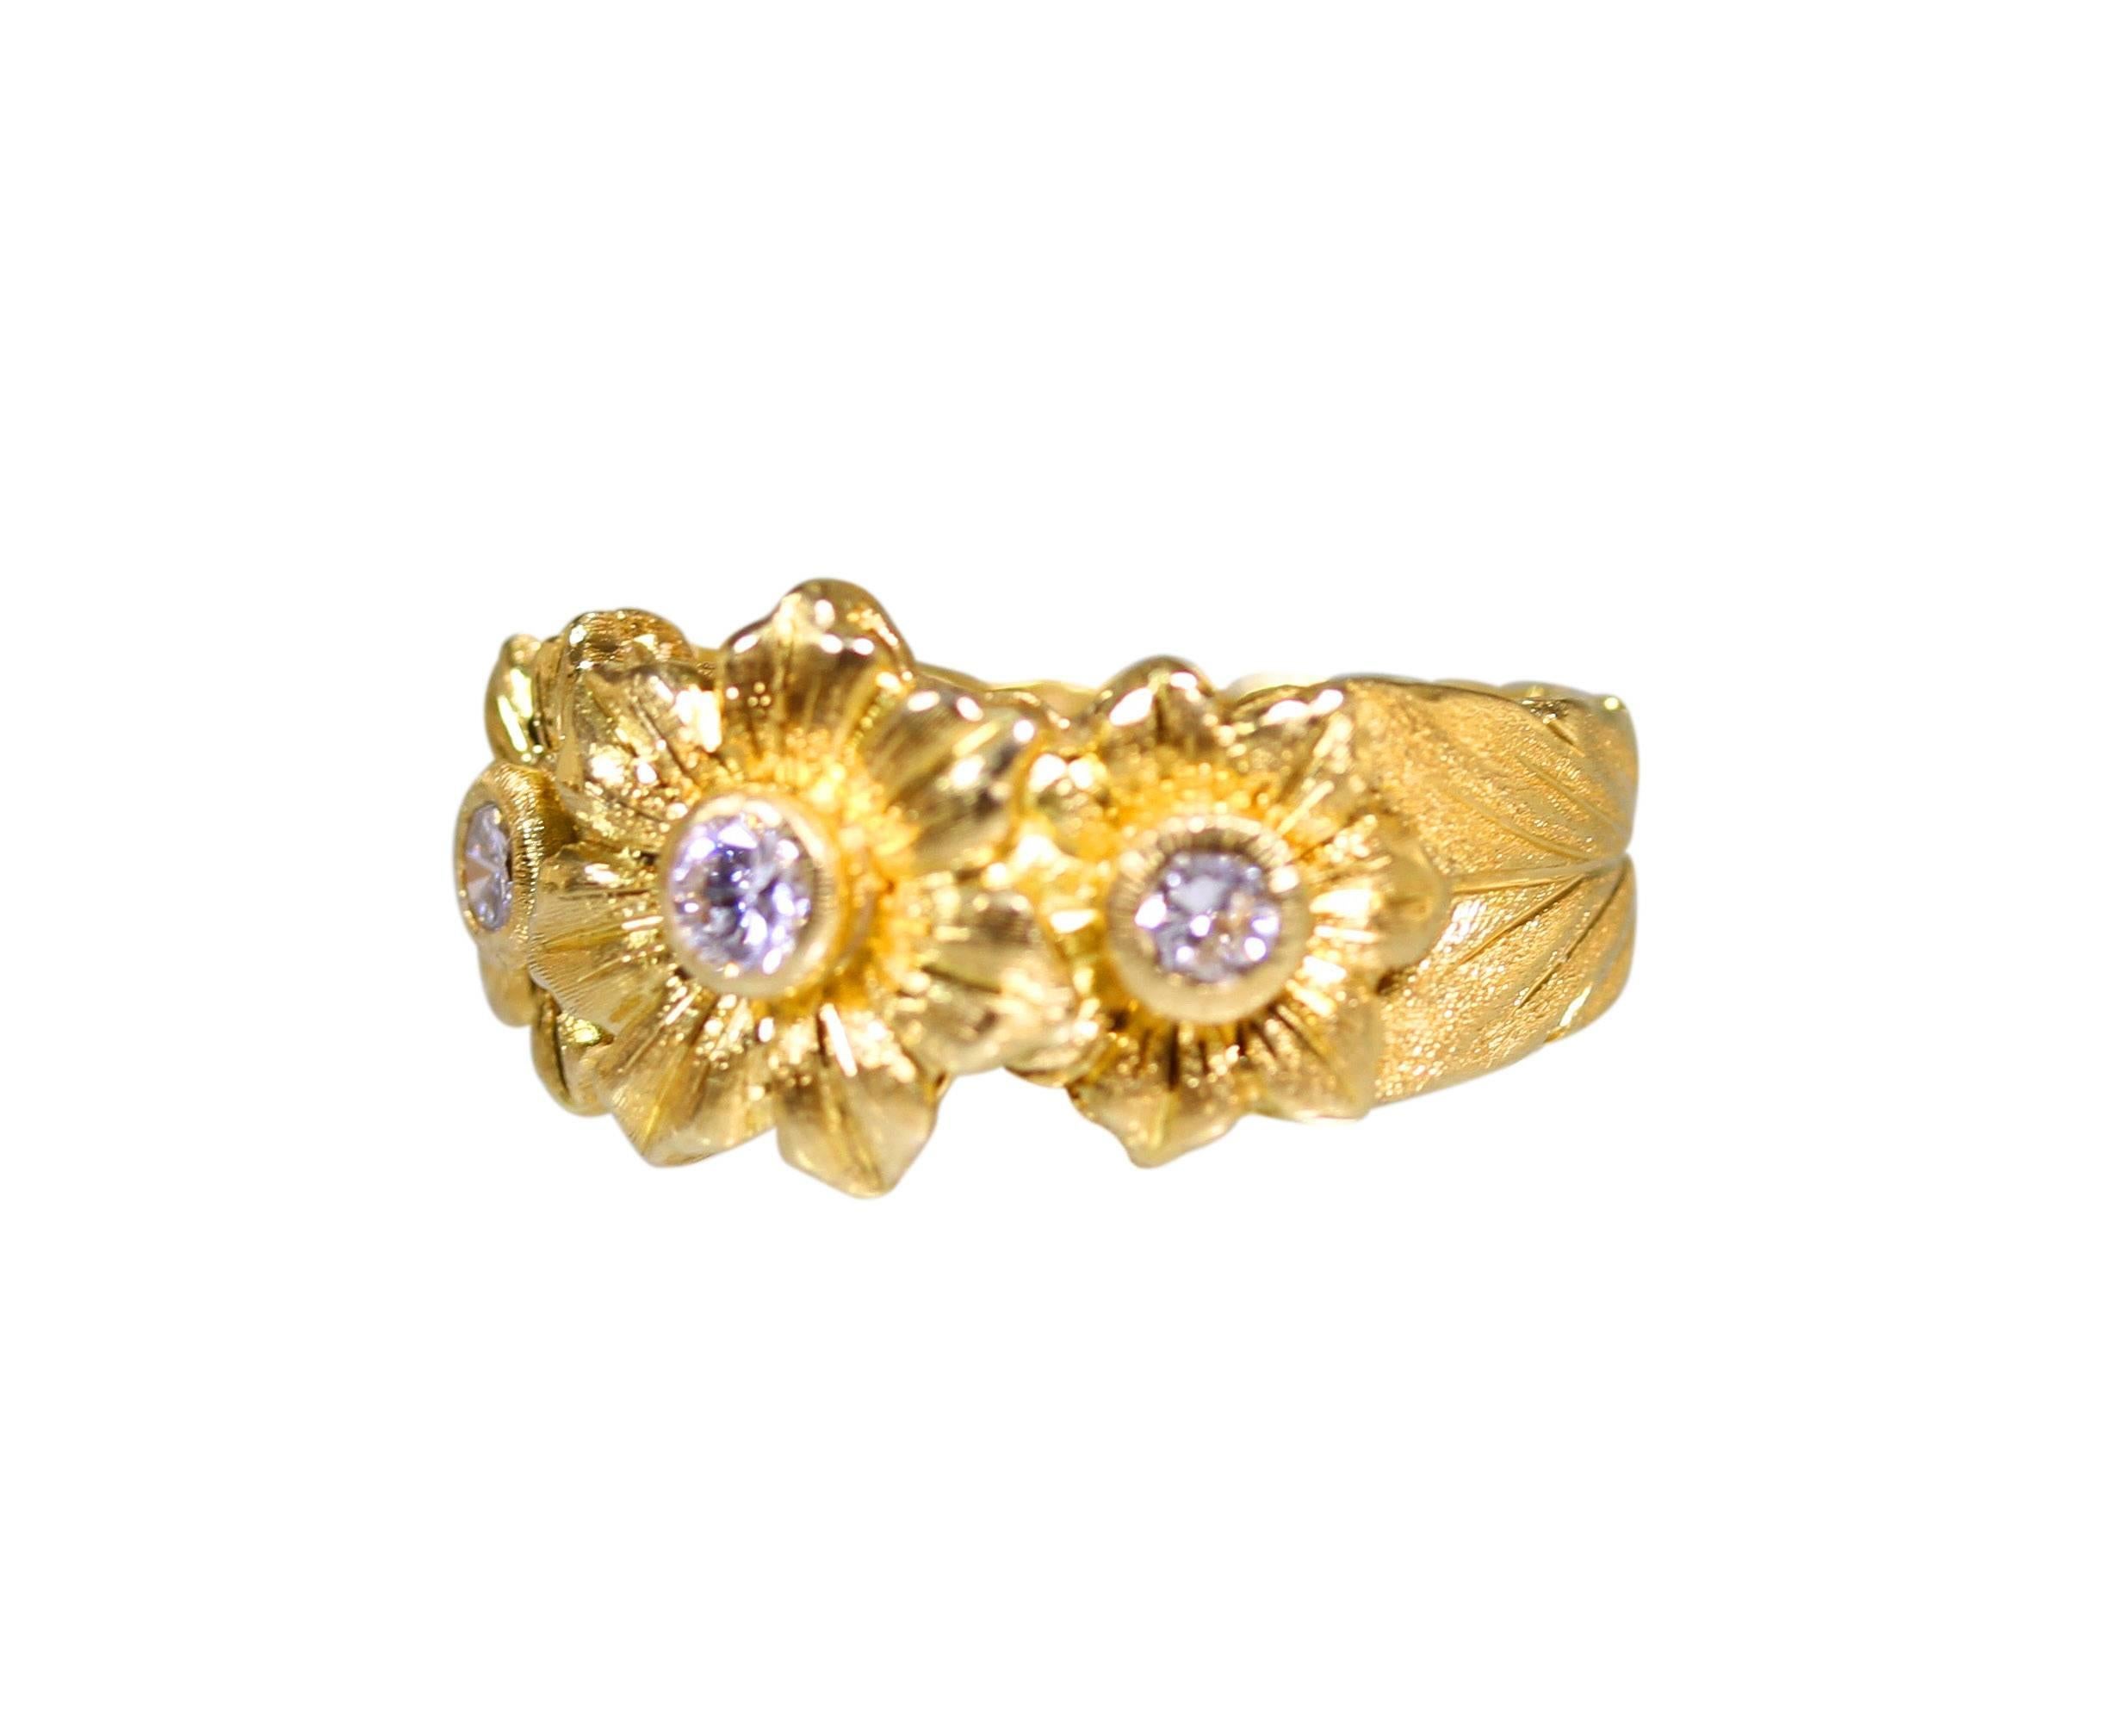 An 18 karat yellow gold and diamond ring by Buccellati, Italy, of floral design composed of three flowers set with 3 round diamonds weighing approximately 0.35 carat, gross weight 8.1 grams, measuring 7/16 by 13/16 by 7/8 inch, size 7, signed Fed.